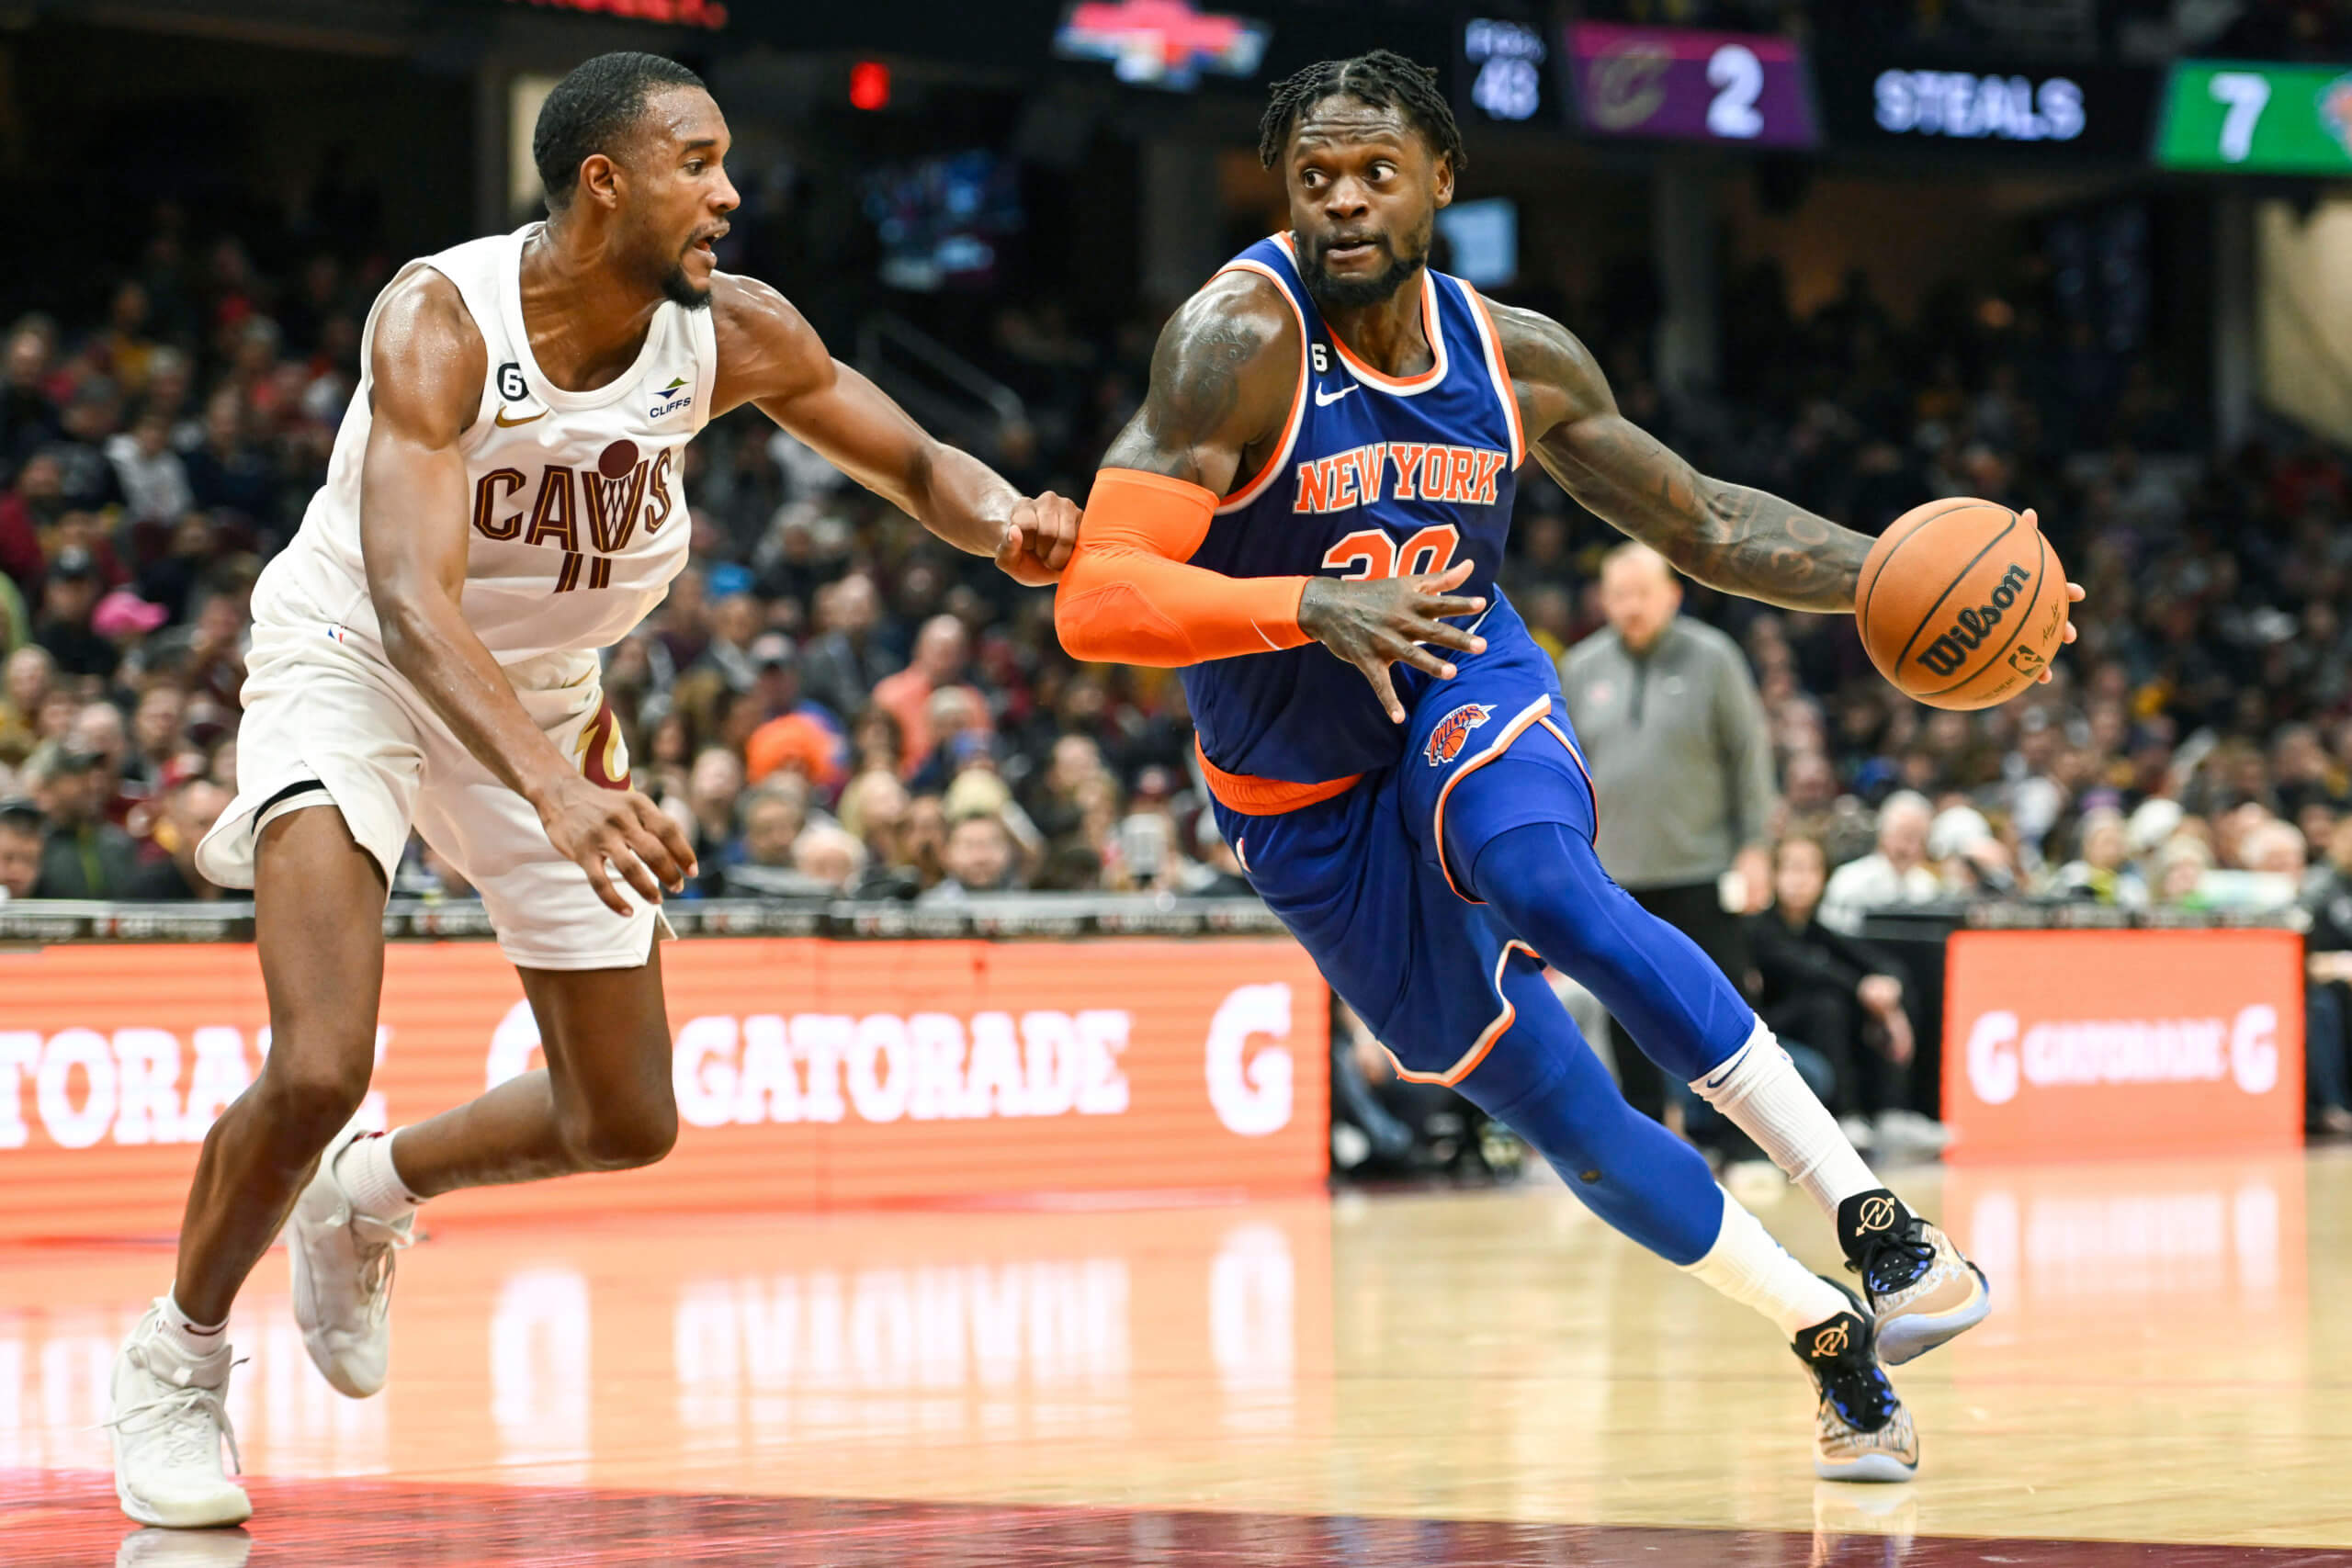 Loss to Donovan Mitchell-led Cavs shows that Knicks are still one